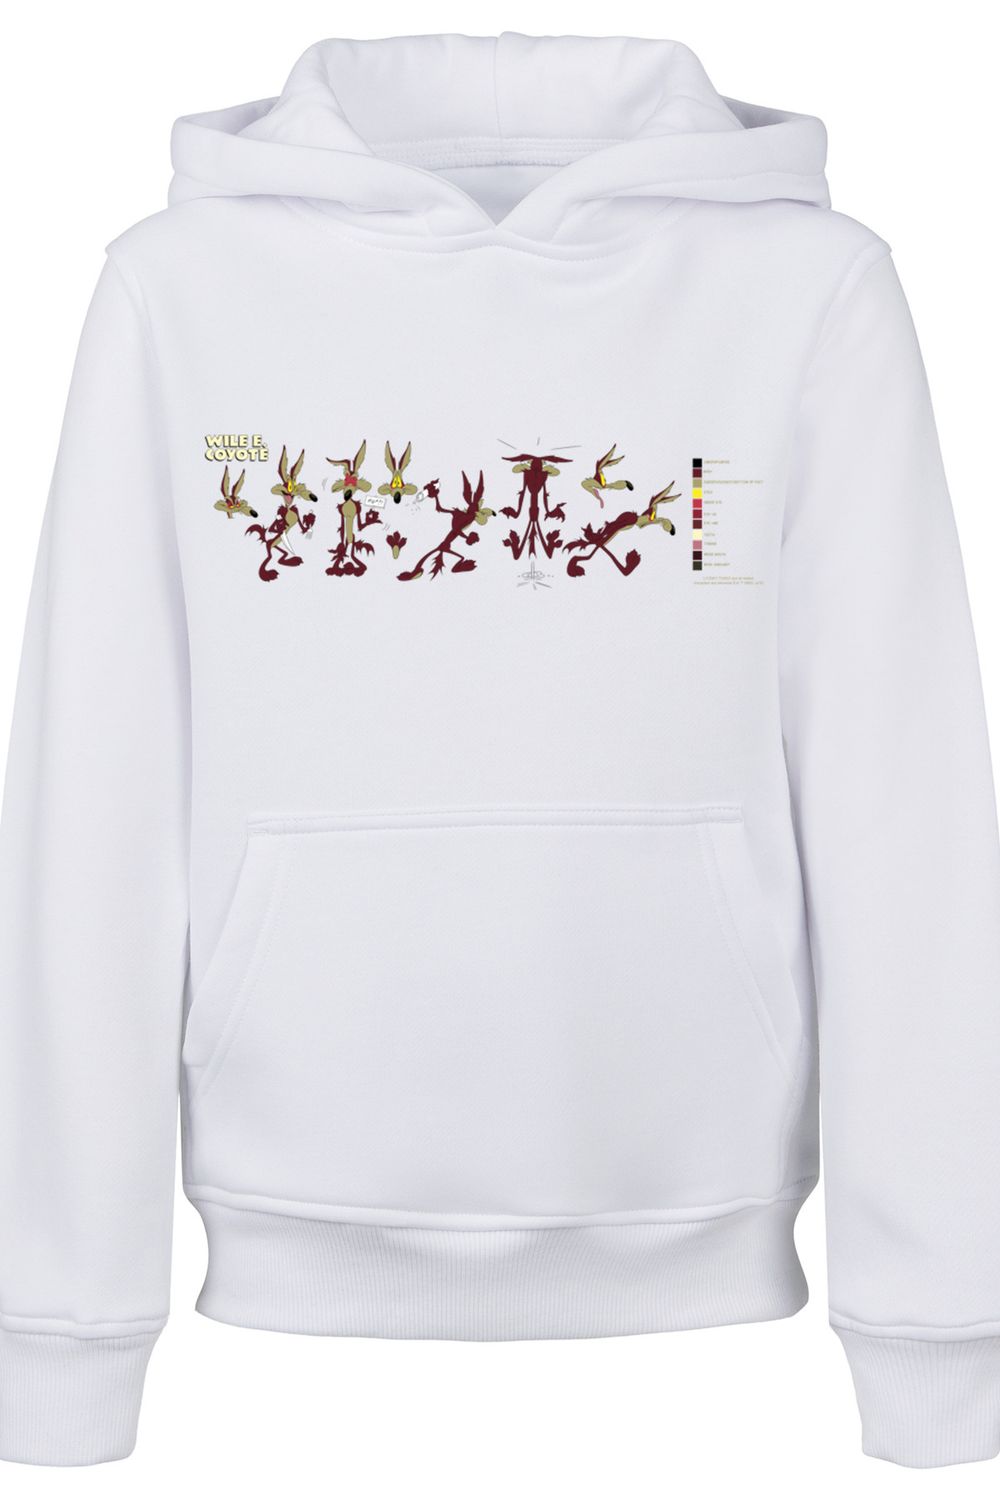 E Basic Trendyol mit Kids - Looney Kinder Wile Farbcode Tunes F4NT4STIC Hoody Coyote